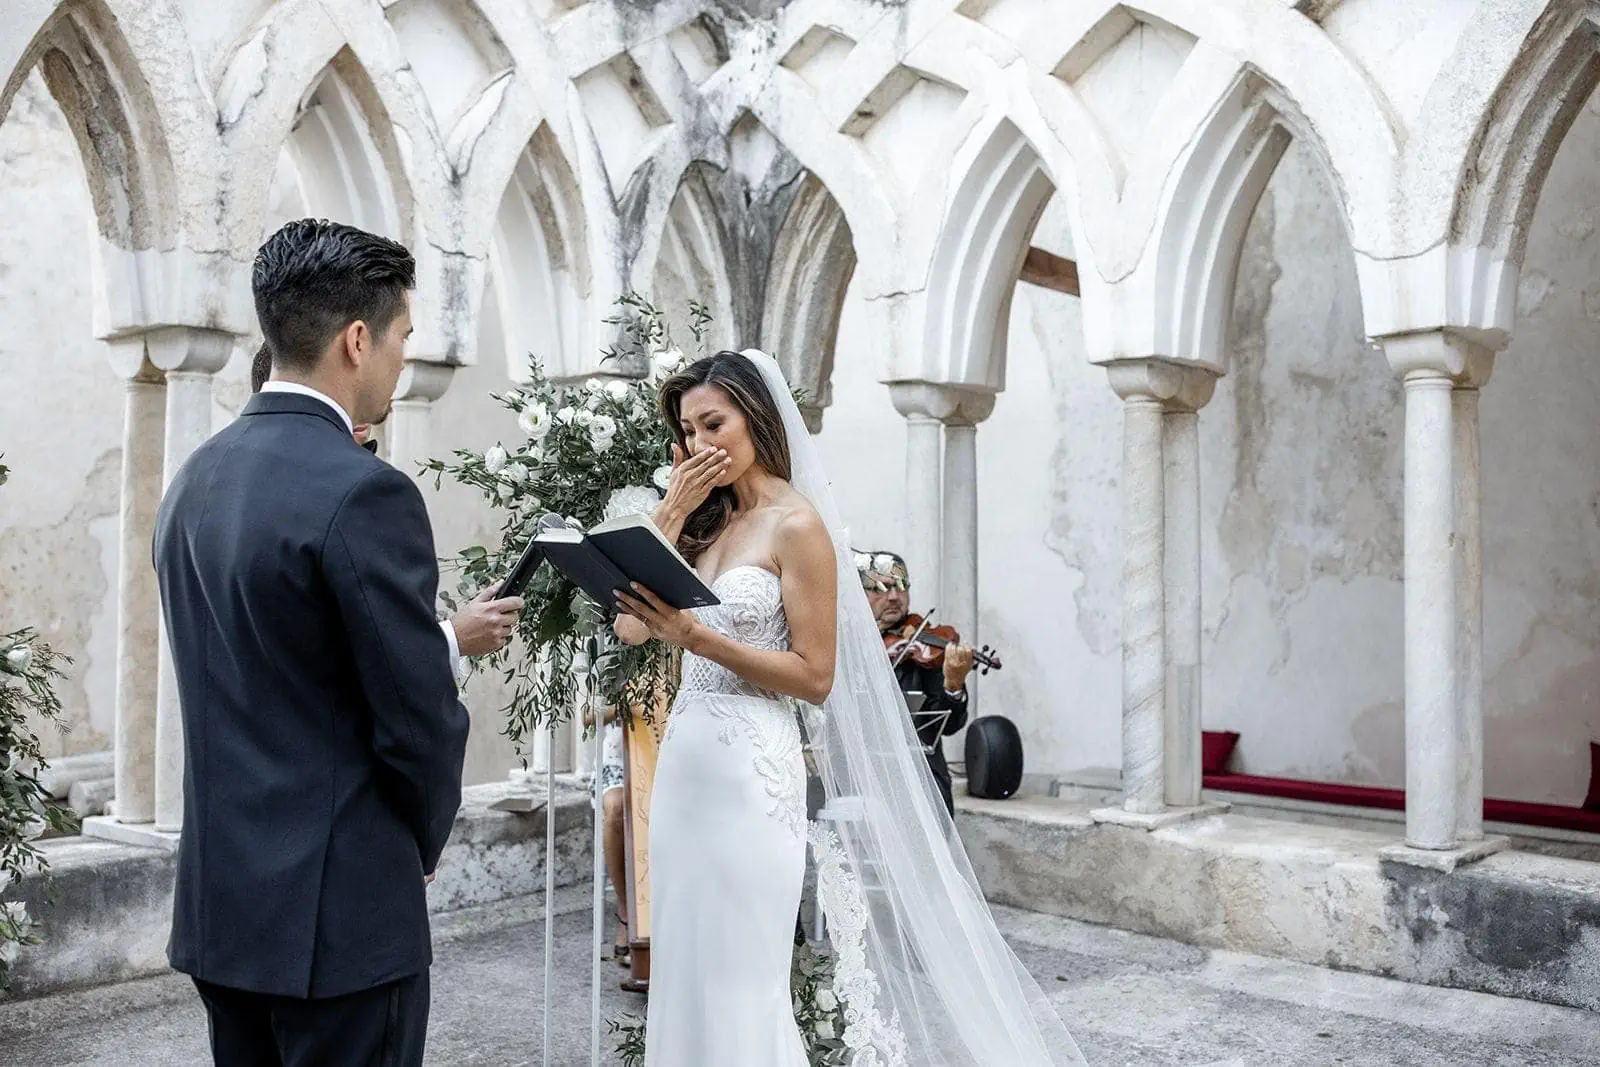 Bride gets emotional during wedding ceremony at Grand Hotel Convento